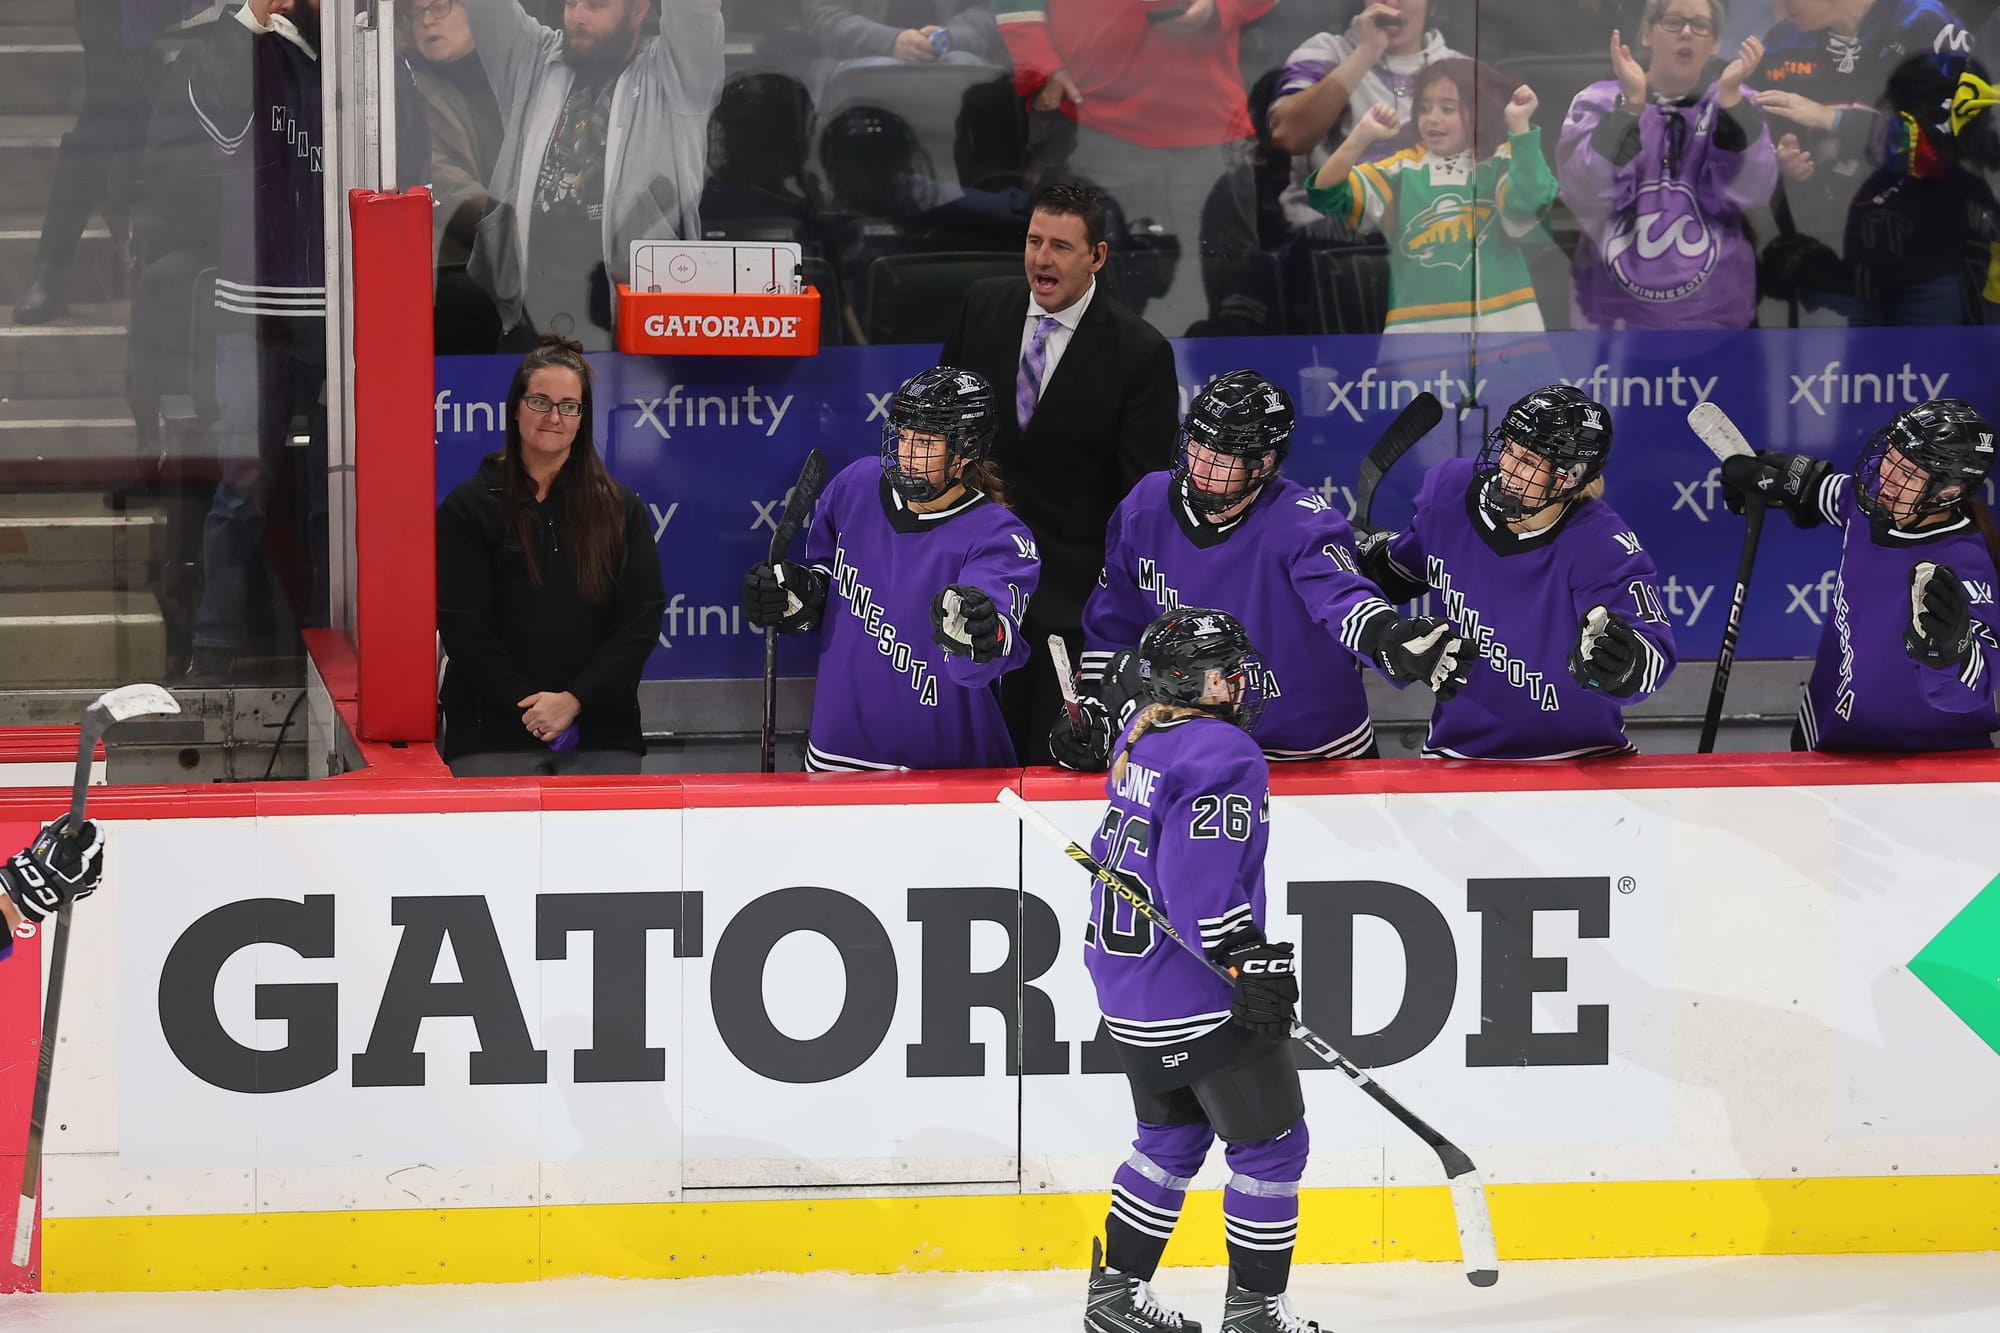 Minnesota captain Kendall Coyne Schofield, wearing a purple home uniform, celebrates at the bench after her first PWHL goal.